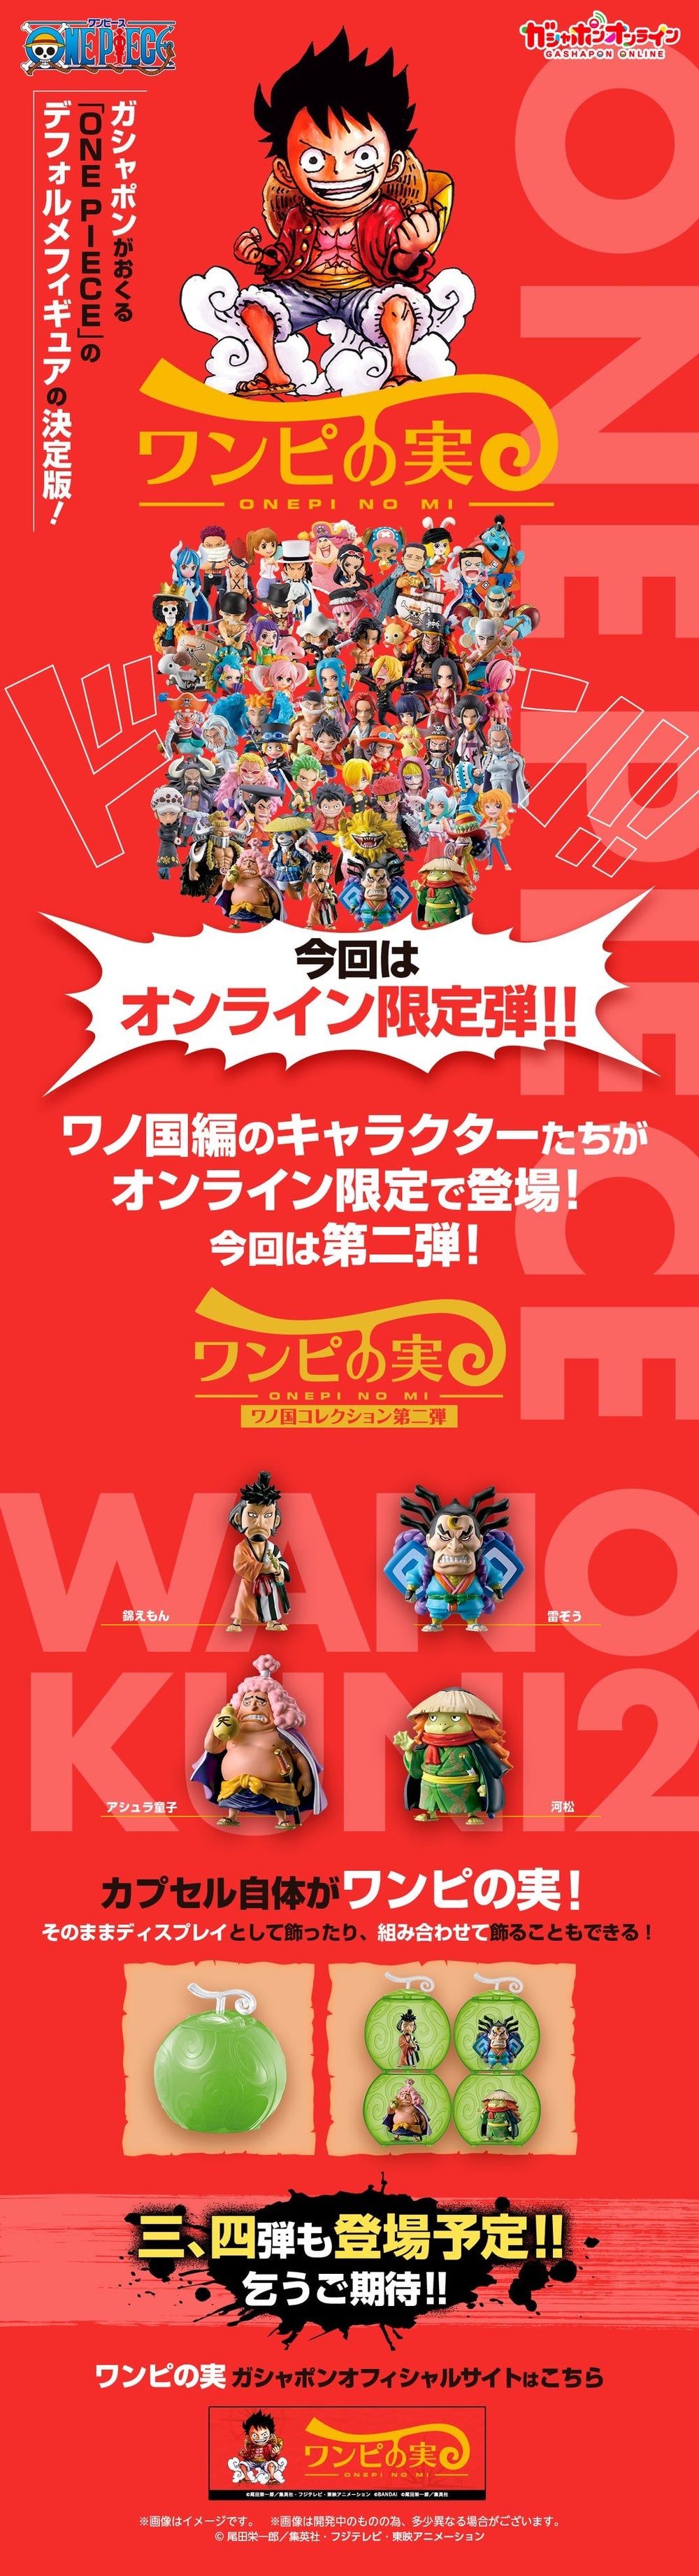 PREORDER Onepi no Mi Wano Country Collection 2
Set of 4